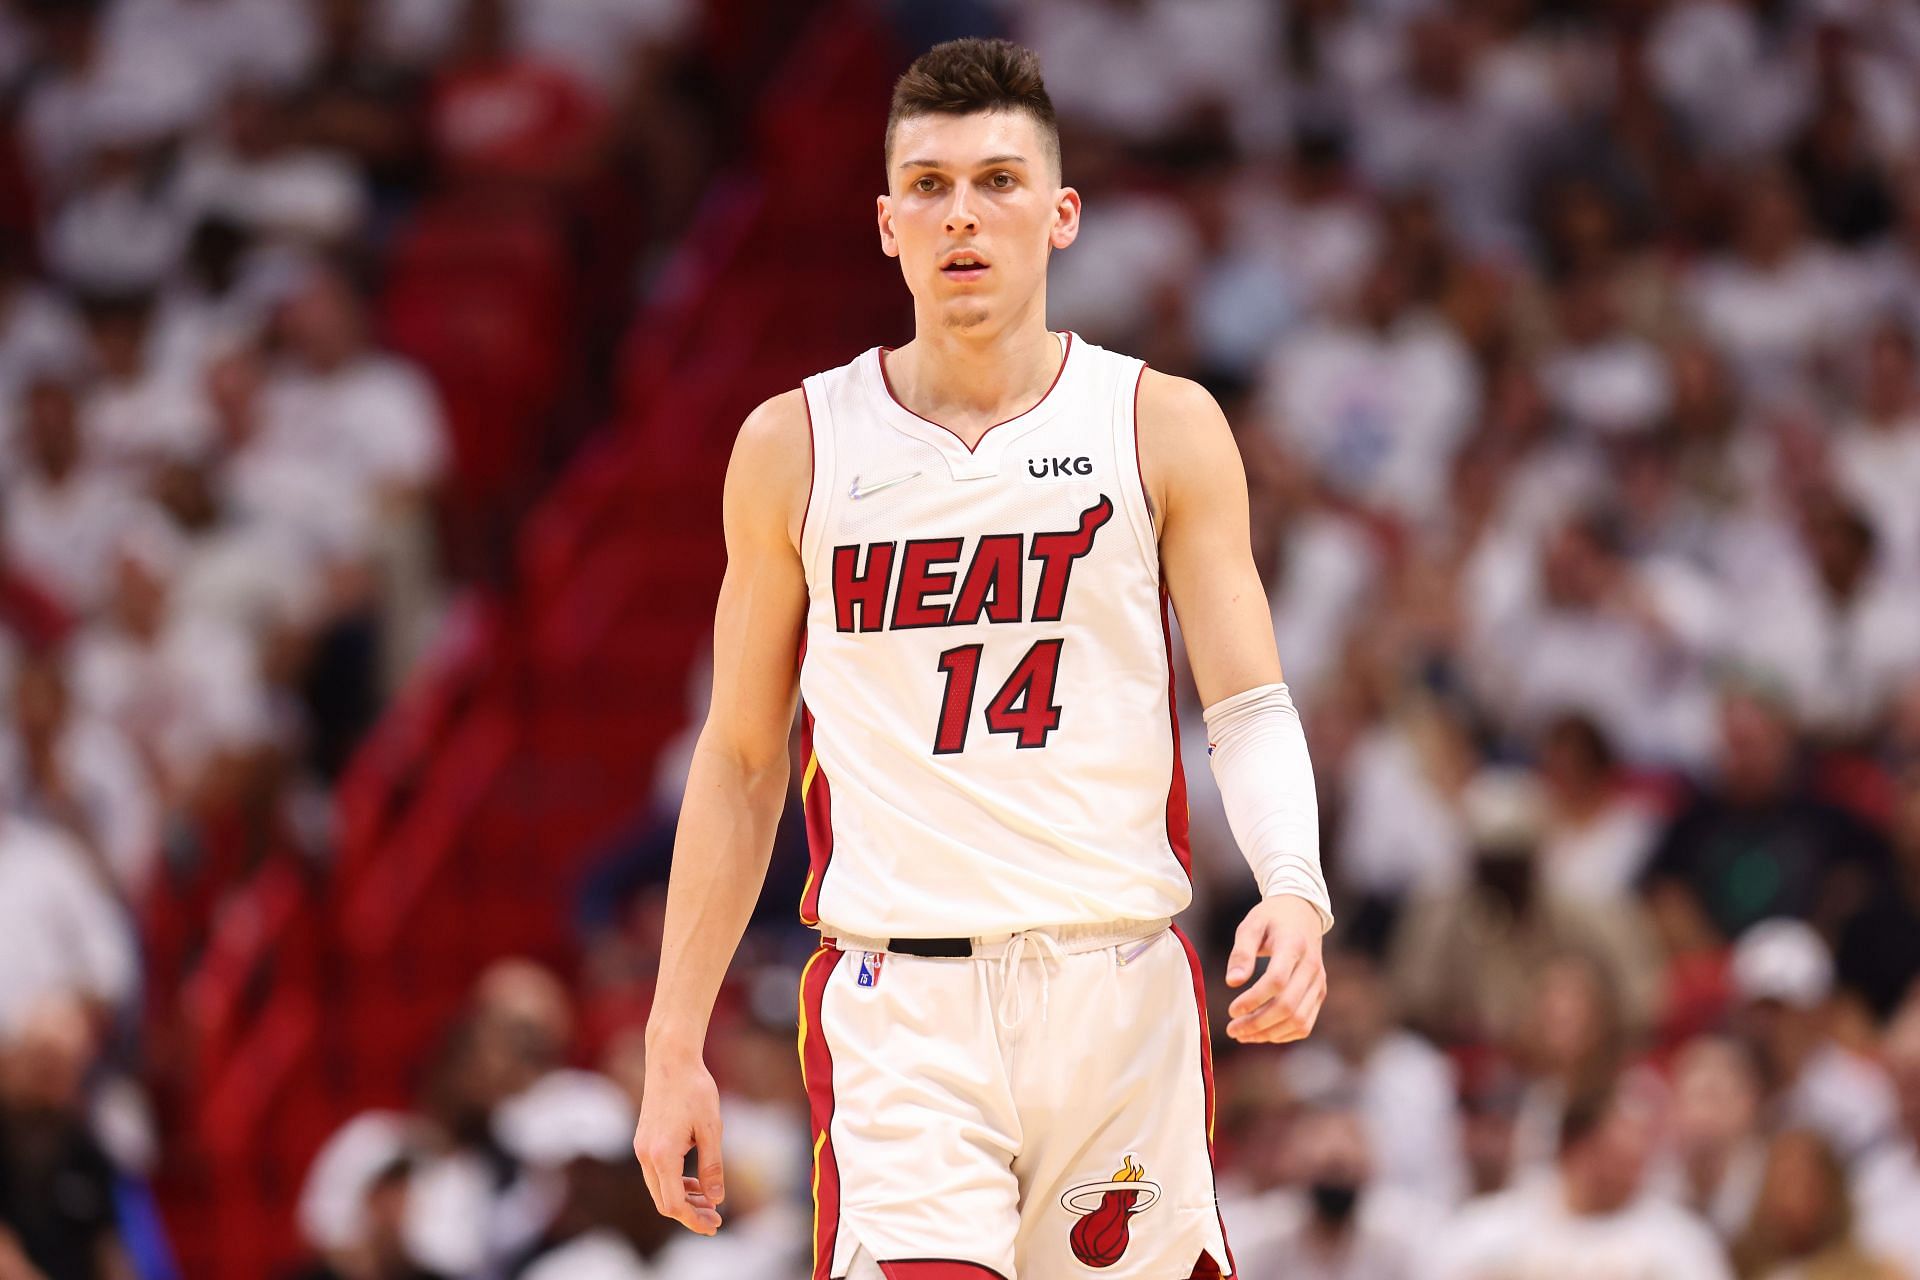 Tyler Herro is the best bench player in the NBA and a big reason why they are so dangerous.